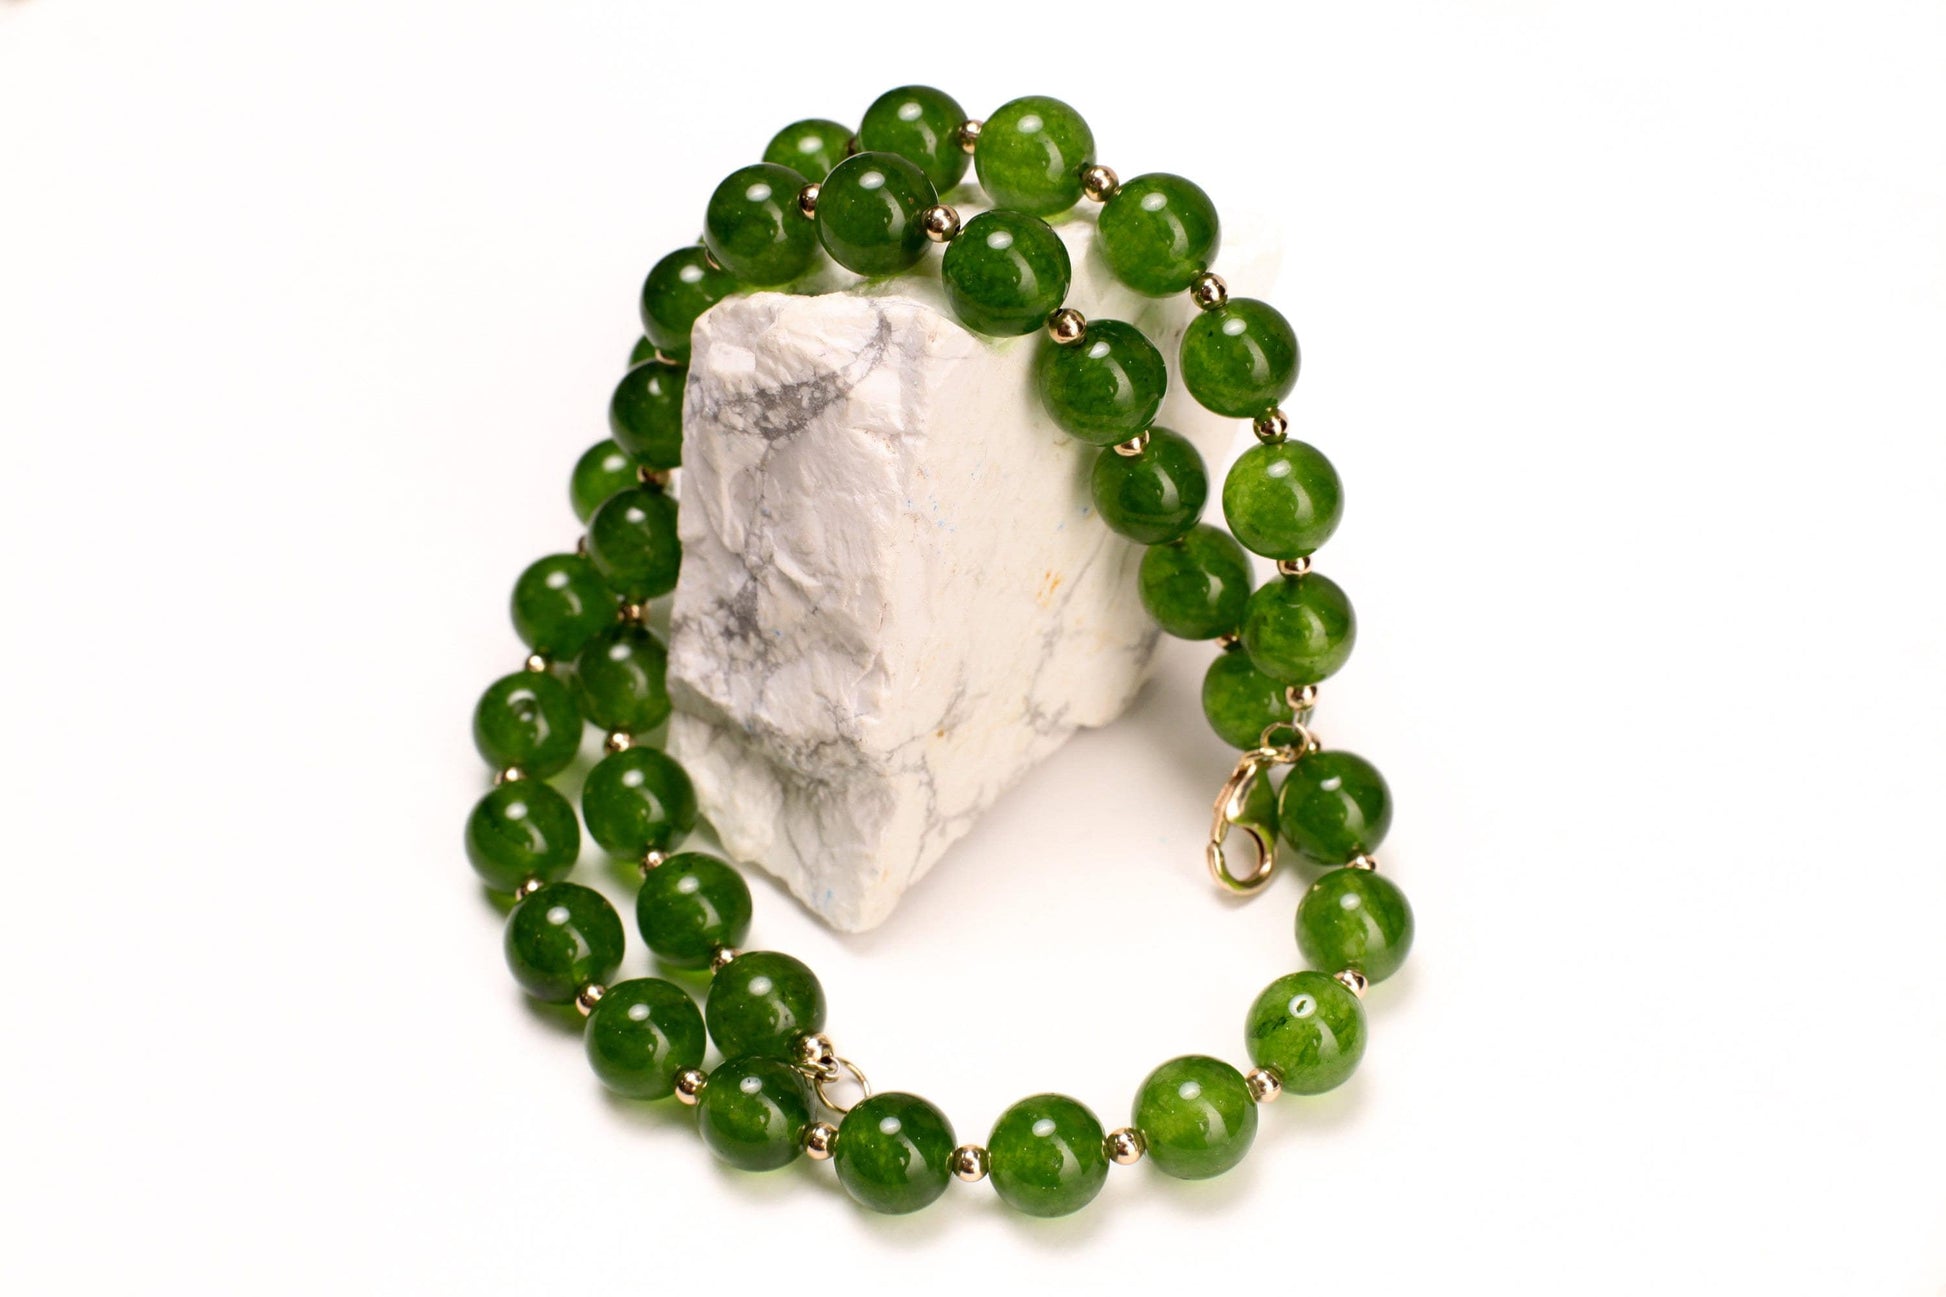 Genuine Green Jade, Nephrite Canada Jade 10mm Round Gold, Gold Filled Necklace, Strong Magnetic Clasp. High Quality Jade 16&quot;- 34&quot; Necklace